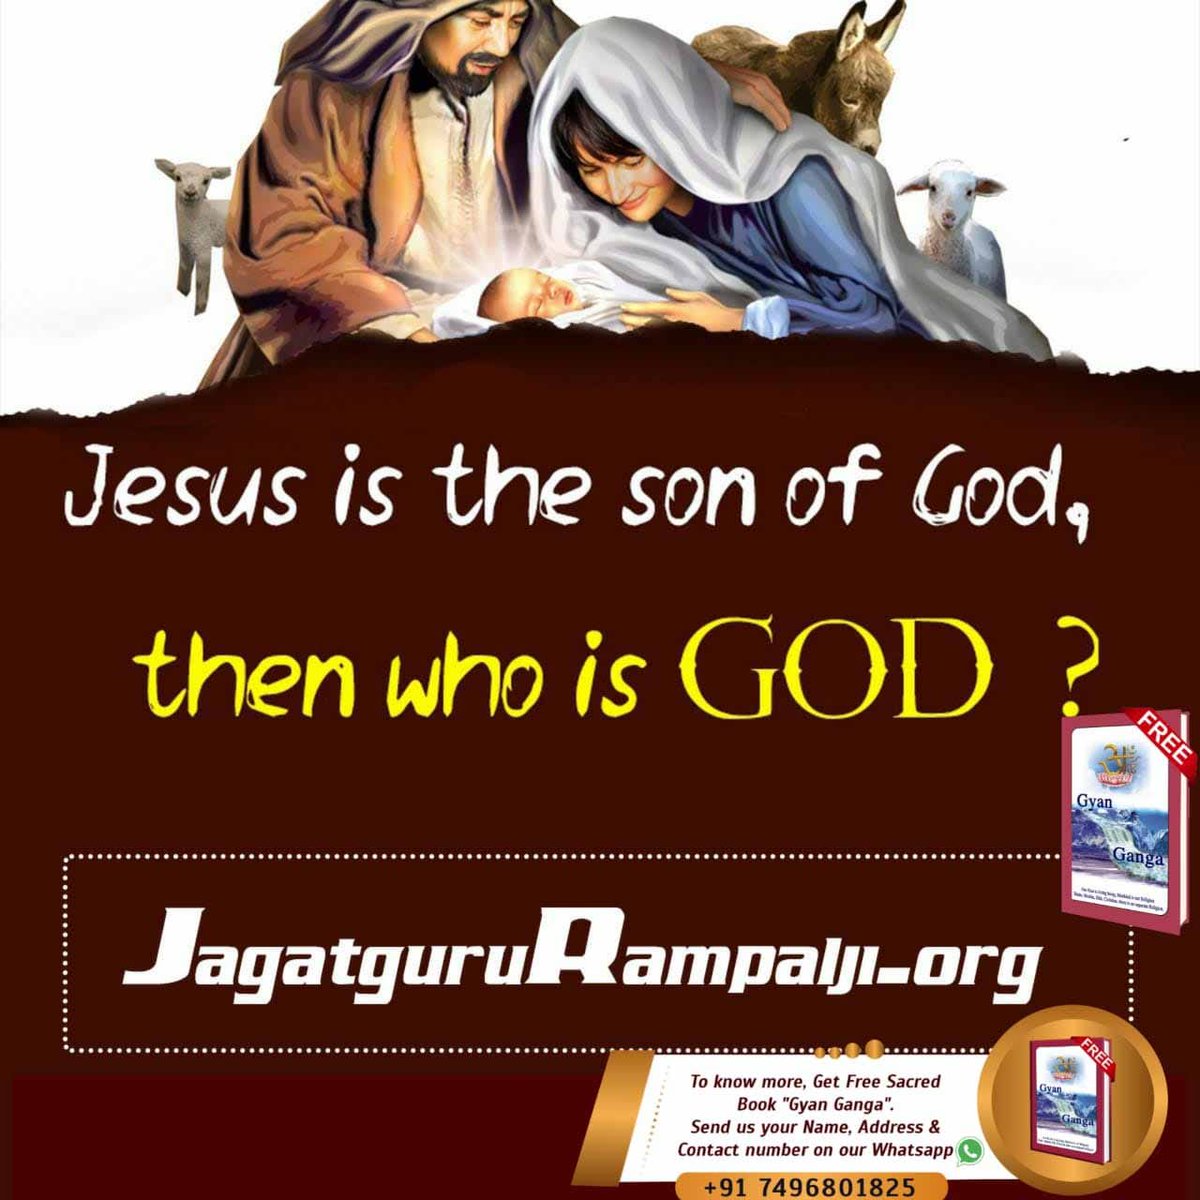 Jesus is the son of God, then who is GOD ❓
To know more, read sacred Book Gyan Ganga to get Free Book. Send Name,
 Address to +91 7496801825
#ईसाई_नहीं_समझे_HolyBible
Almighty God Kabir